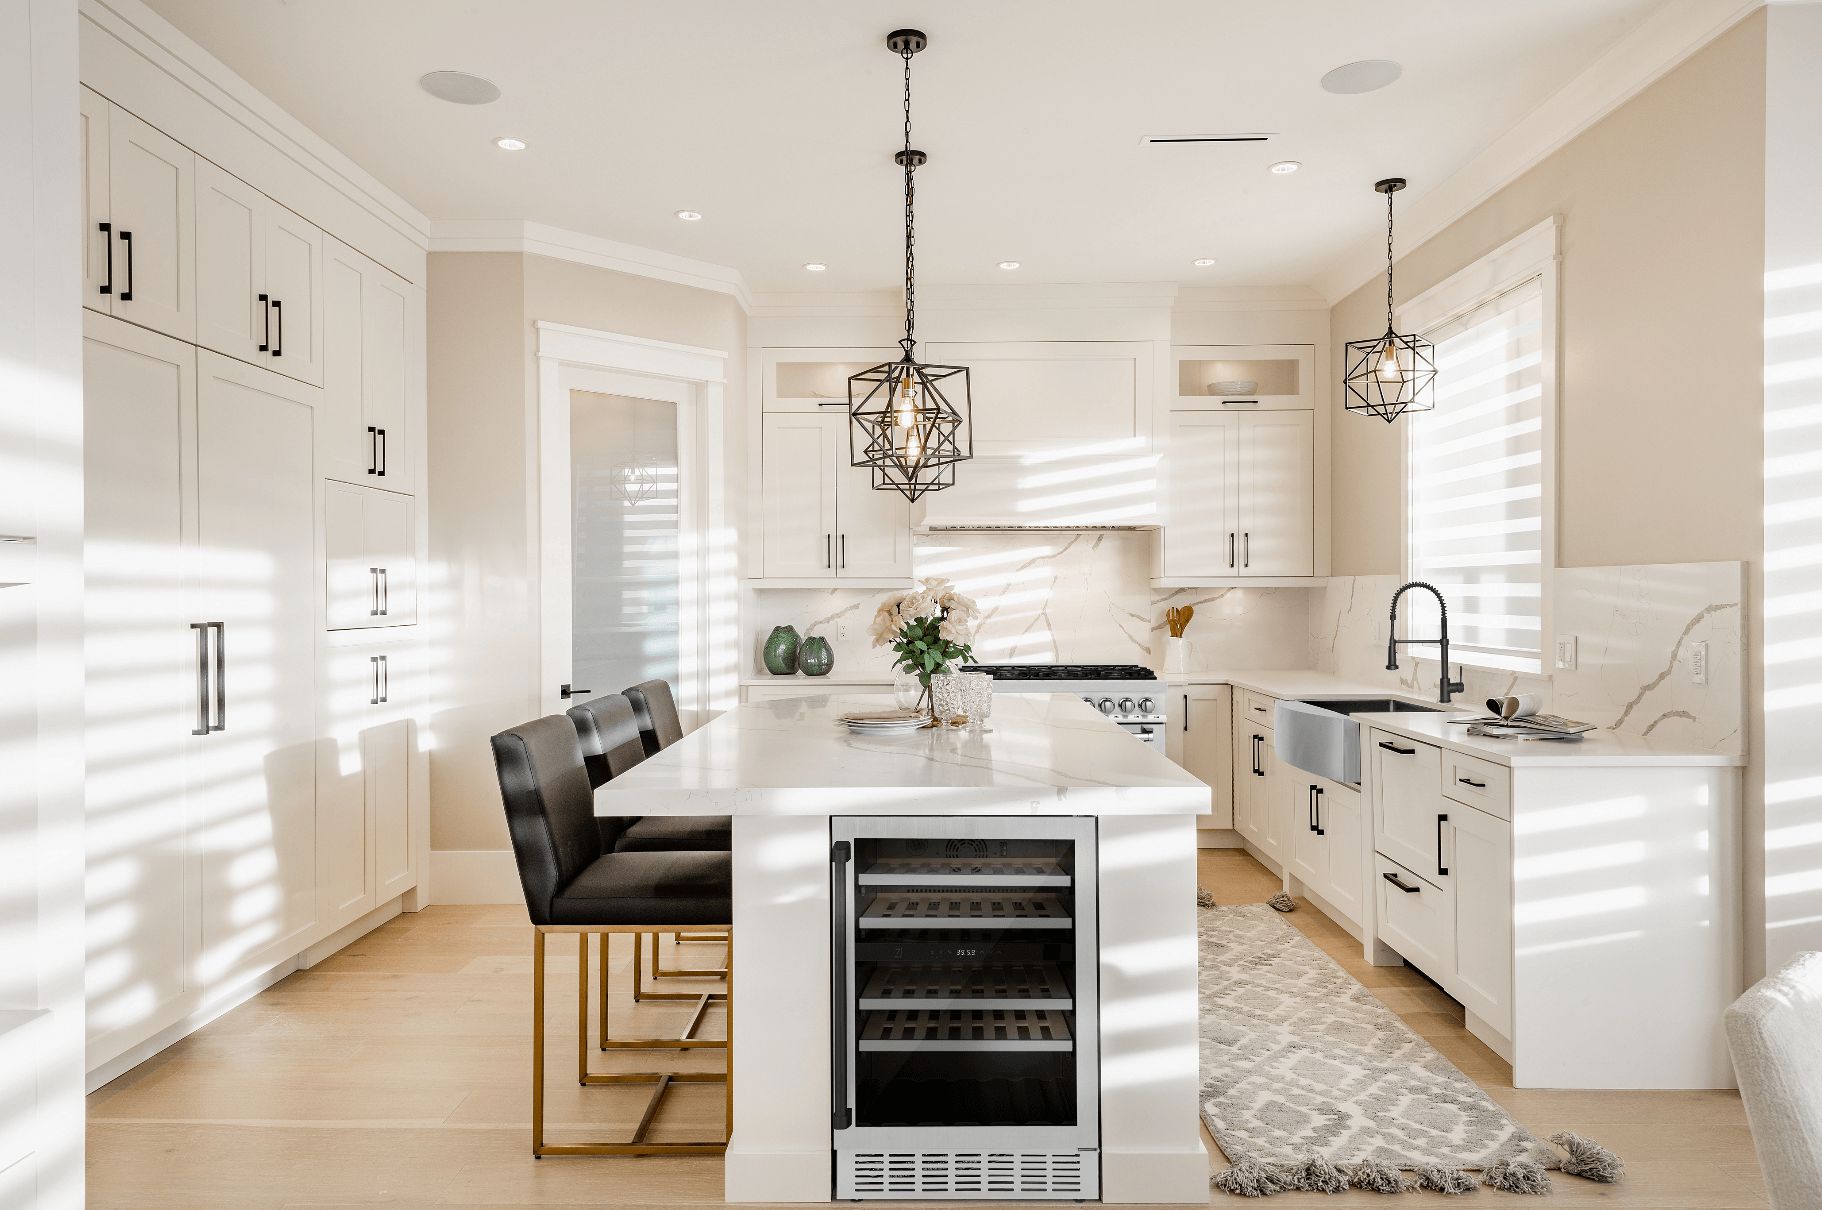 ZLINE 24" Autograph Edition Monument Wine Cooler in a cottage-style kitchen with island.